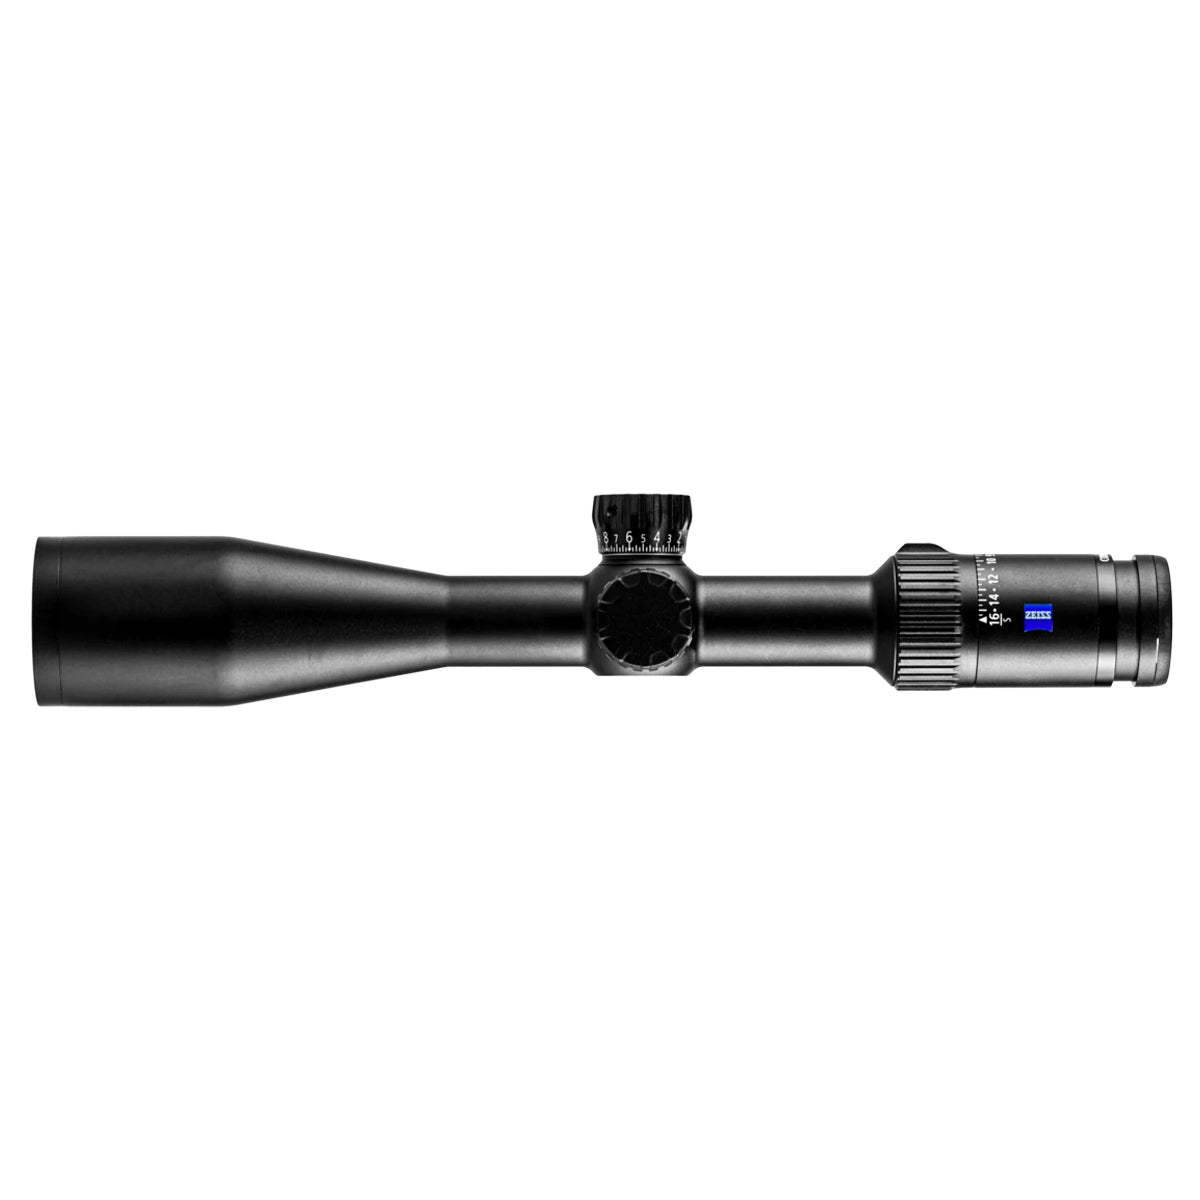 Zeiss Conquest V4 4-16x44 w/ ZBi Illuminated #68 Reticle Rifle Scope